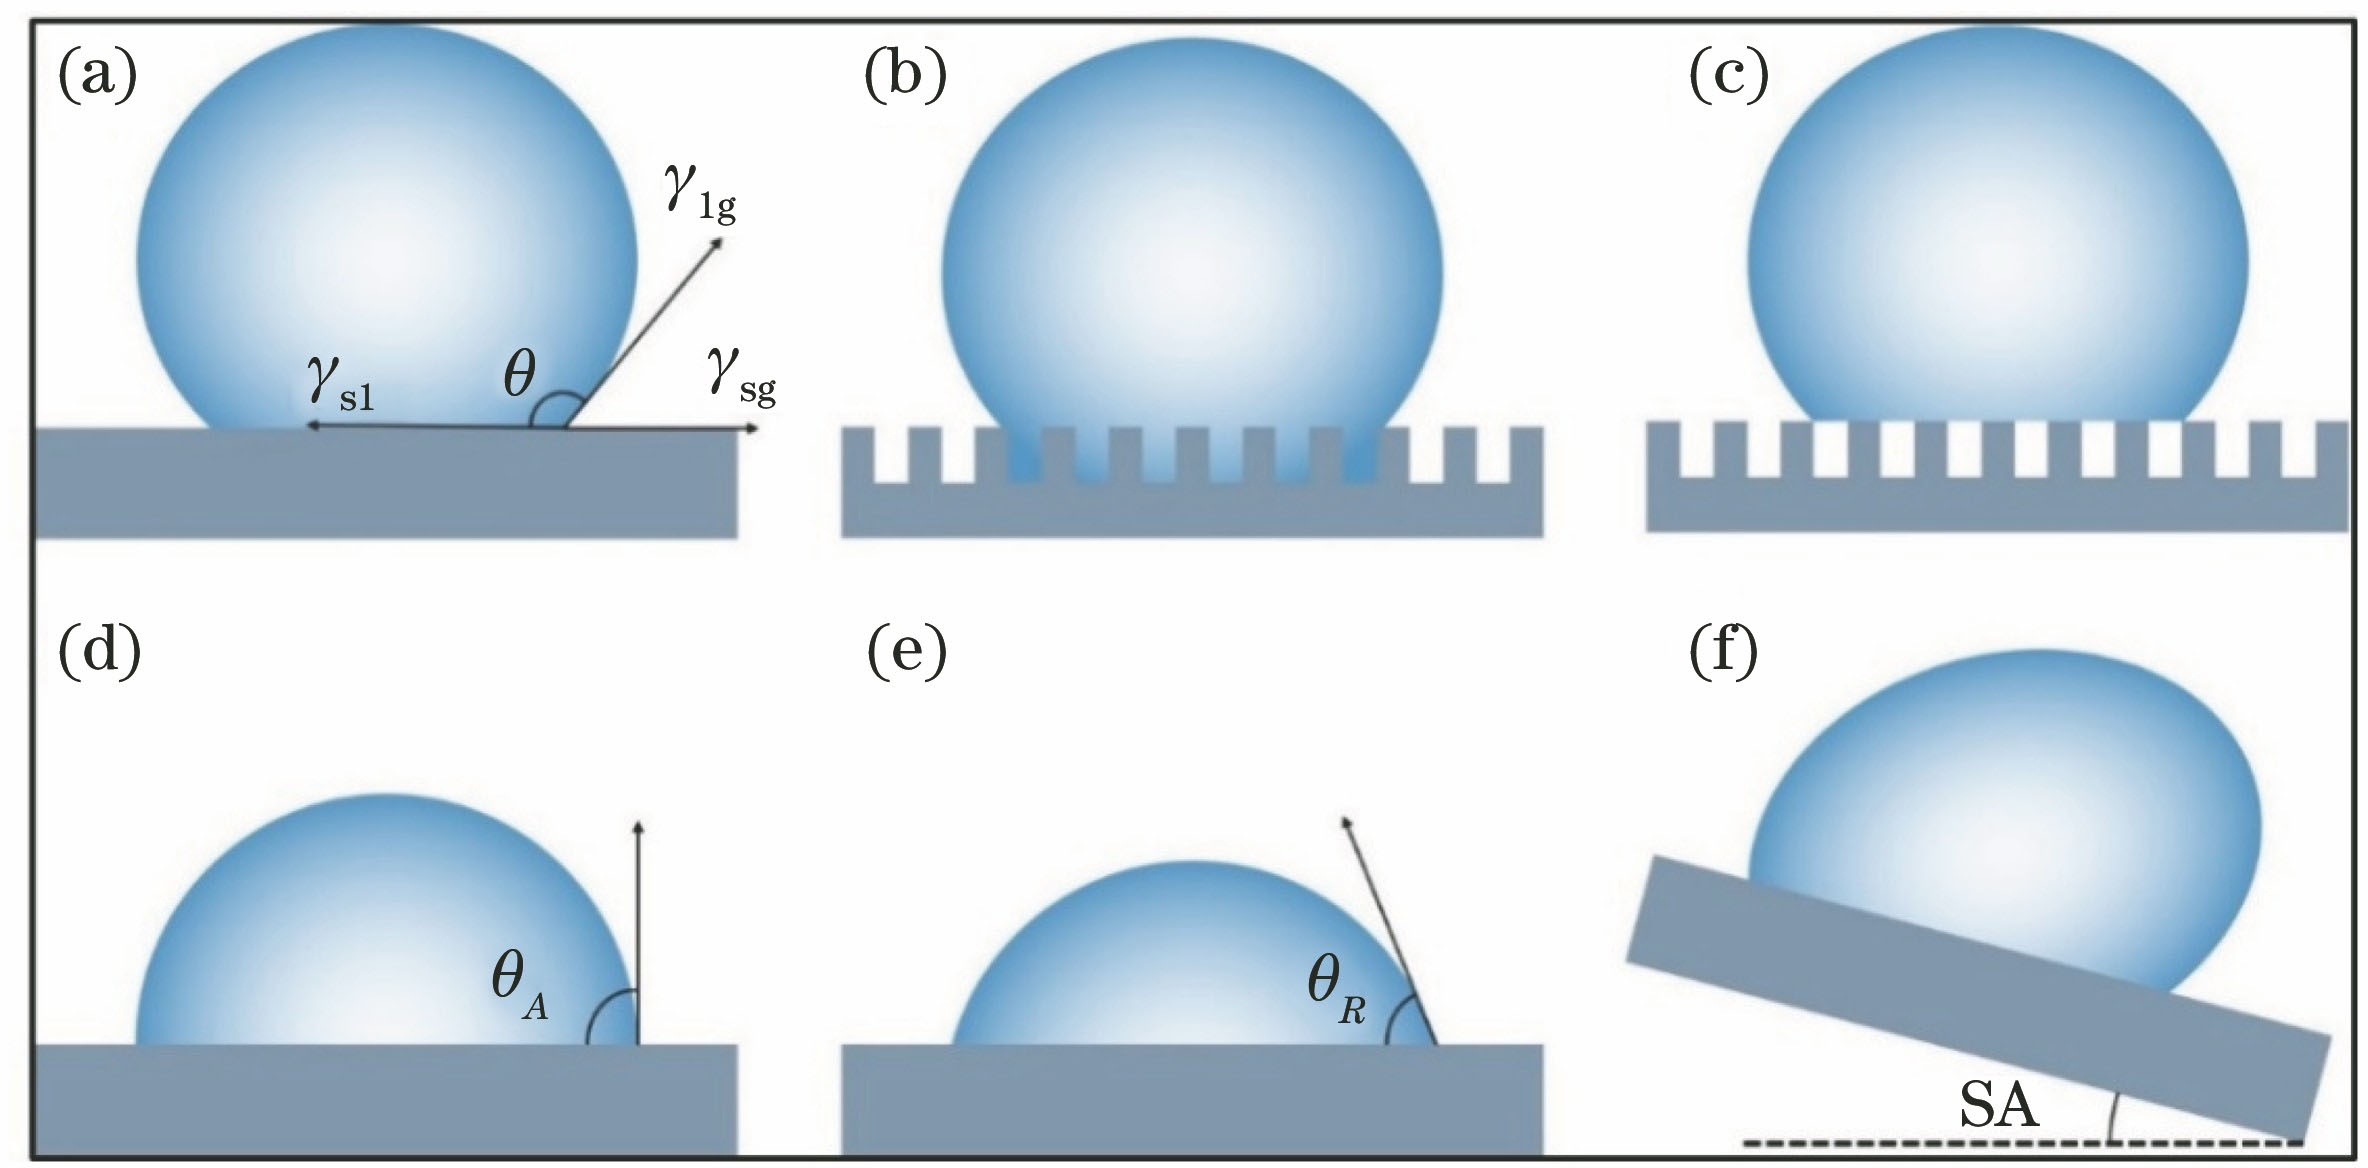 Surface wettability model. (a) Young's state; (b) Wenzel model; (c) Cassie model; (d) angle of droplet is advancing angle when droplet is added and contact line remains stationary; (e) contact angle of droplet is receding angle when droplet is drawn and contact line remains stationary; (f) sliding angle of droplet